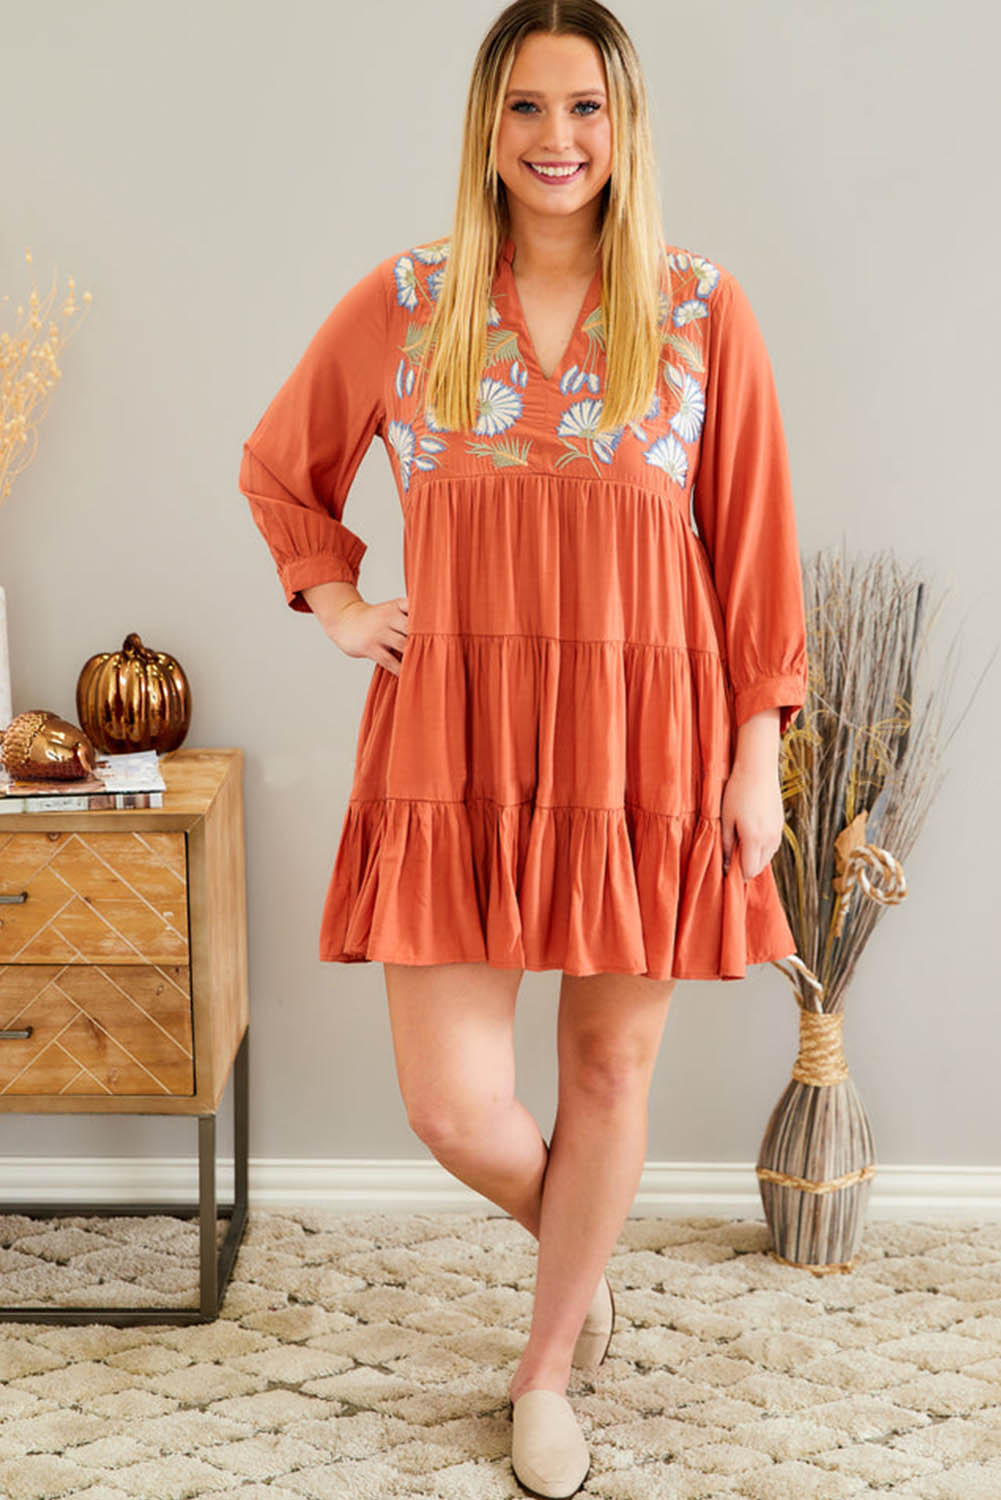 Embroidered Tiered Ruffle Dress